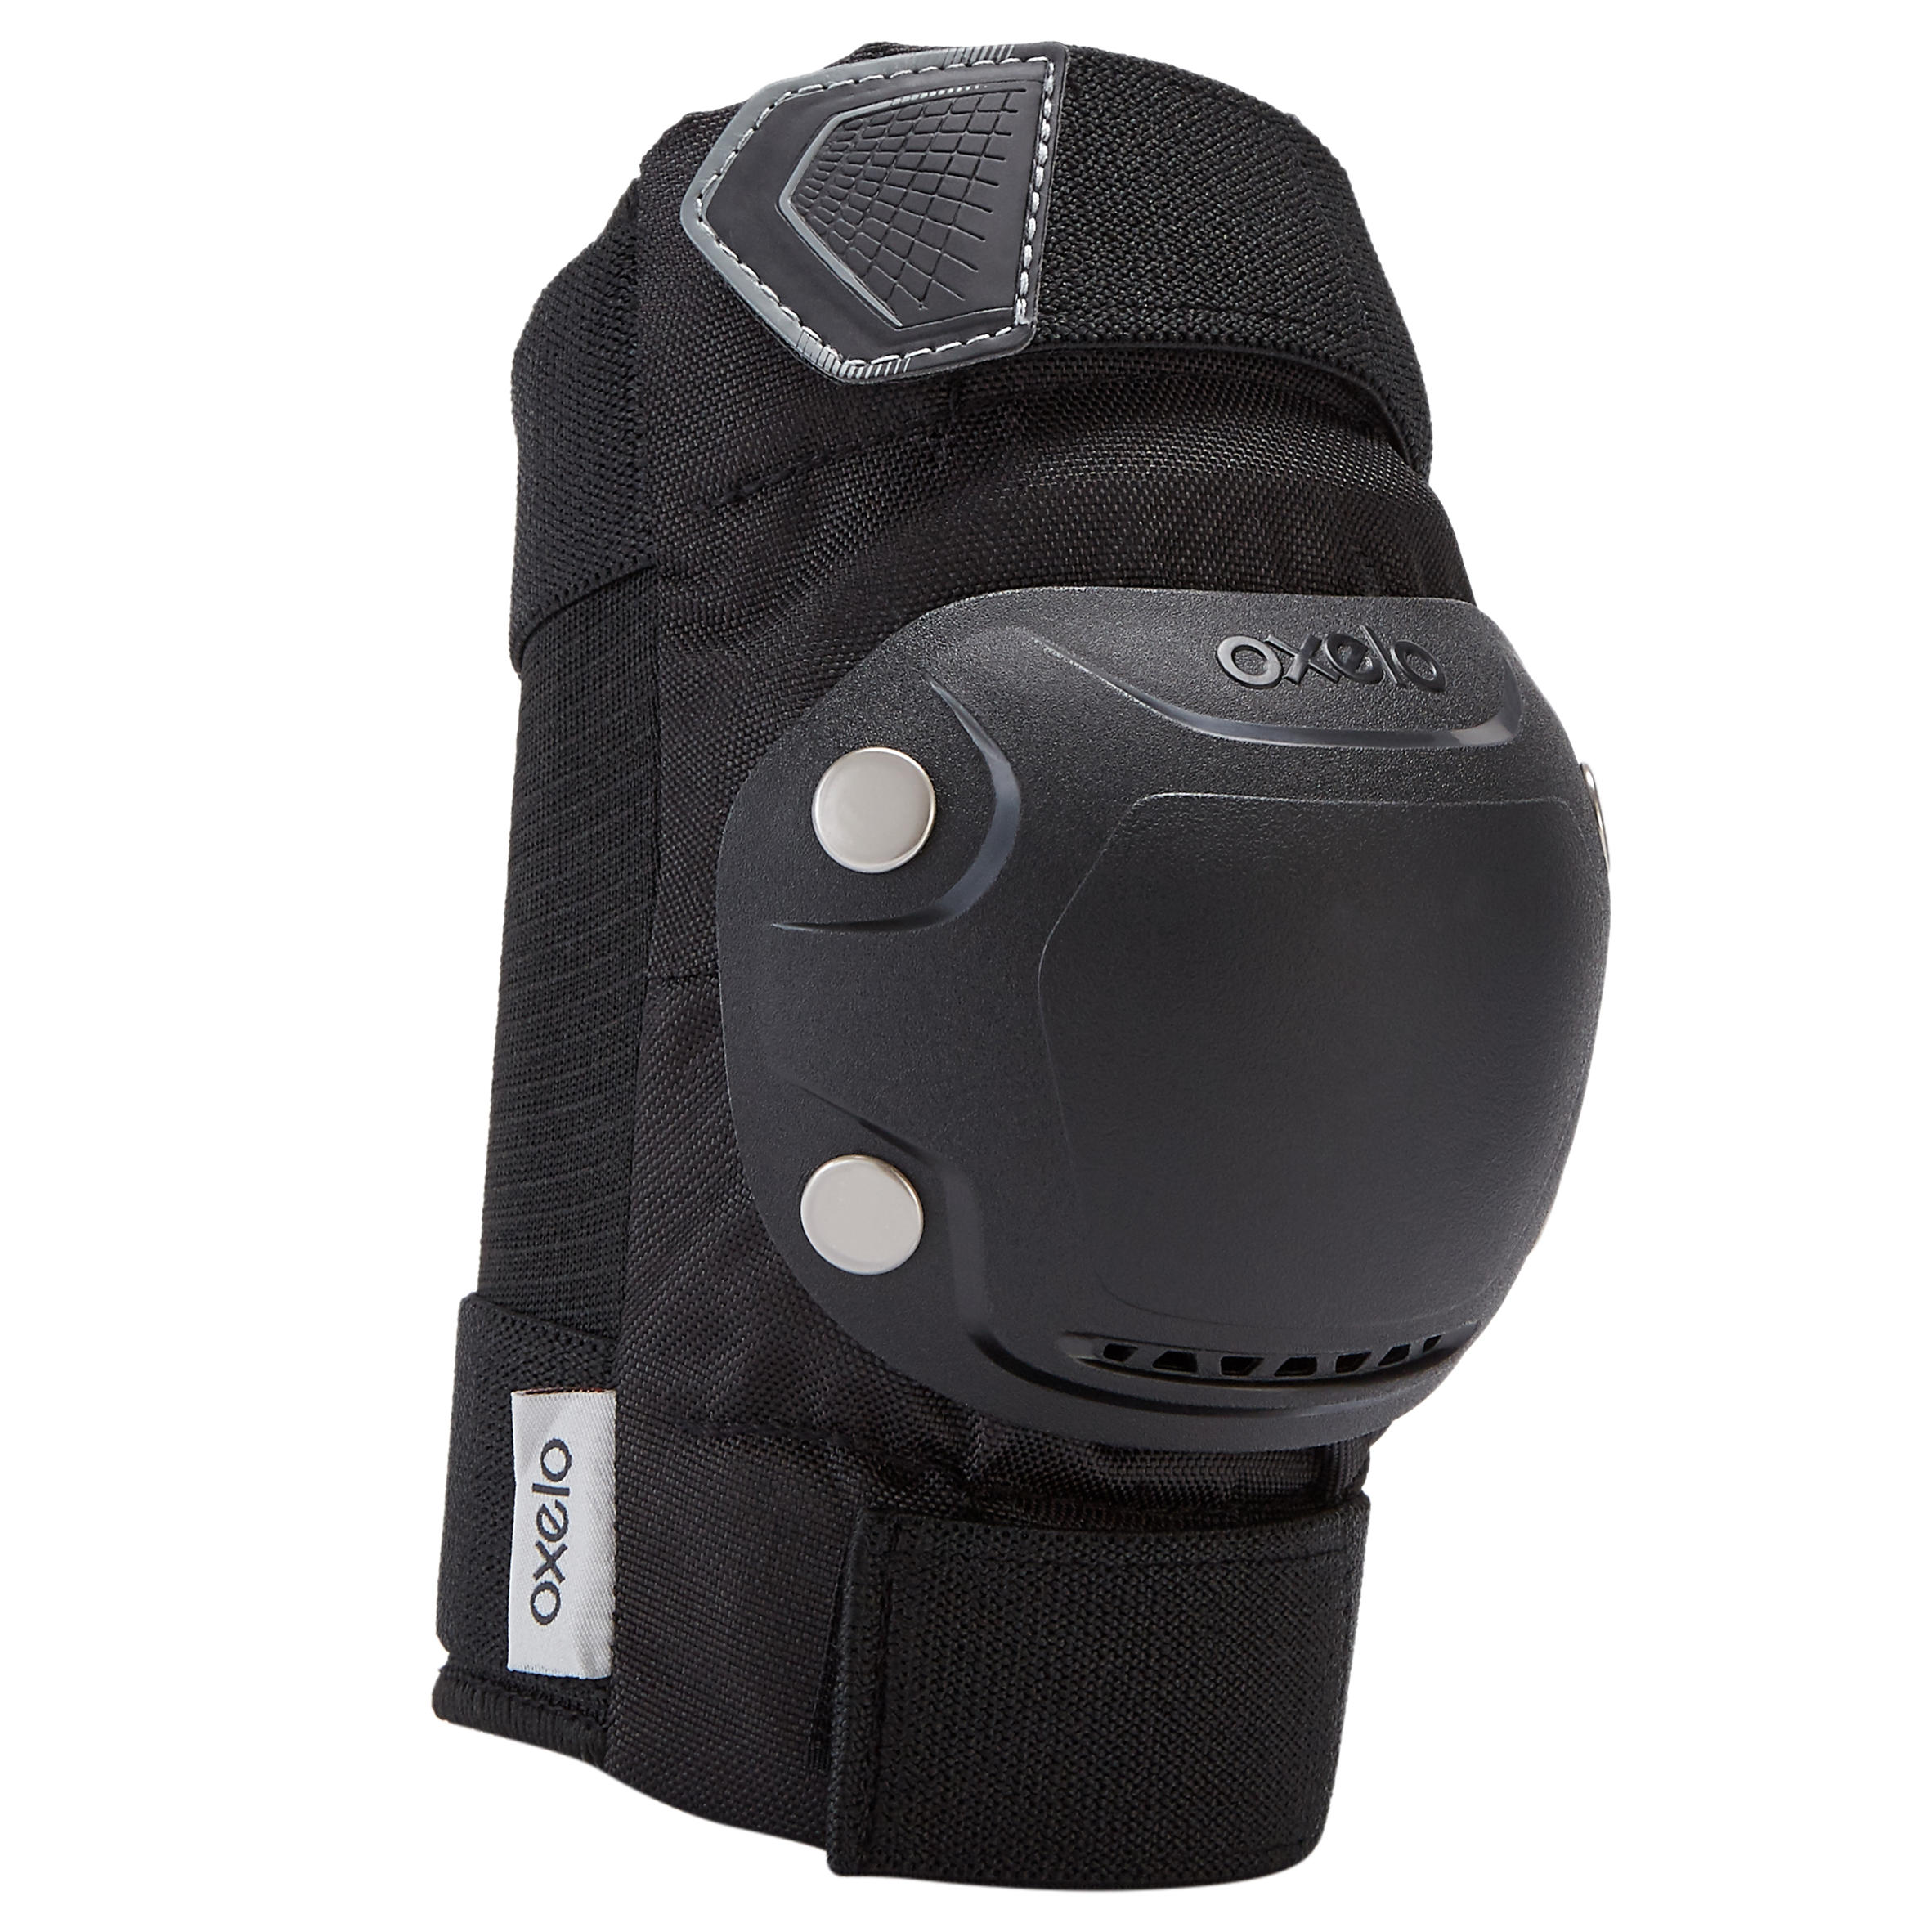 Inline Skate Protection - FIT 500 Black/Grey - OXELO